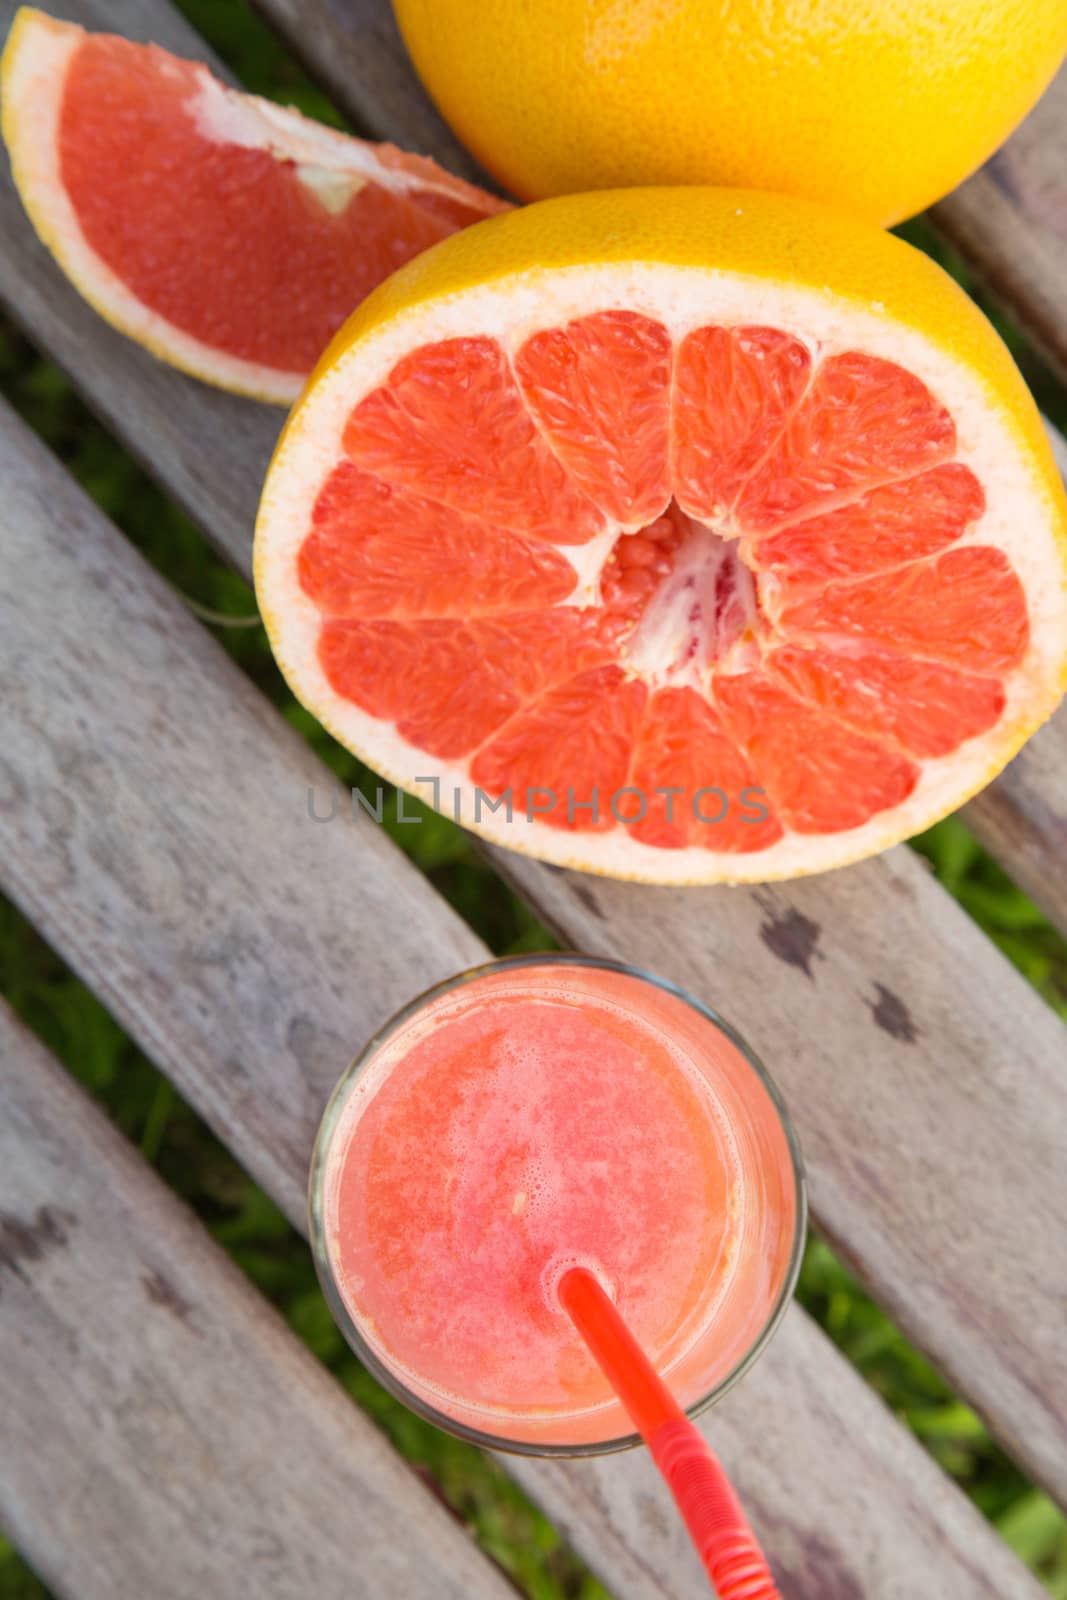 Pieces of grapefruit and a glass of fresh squeezed grapefruit juice on the wooden surface